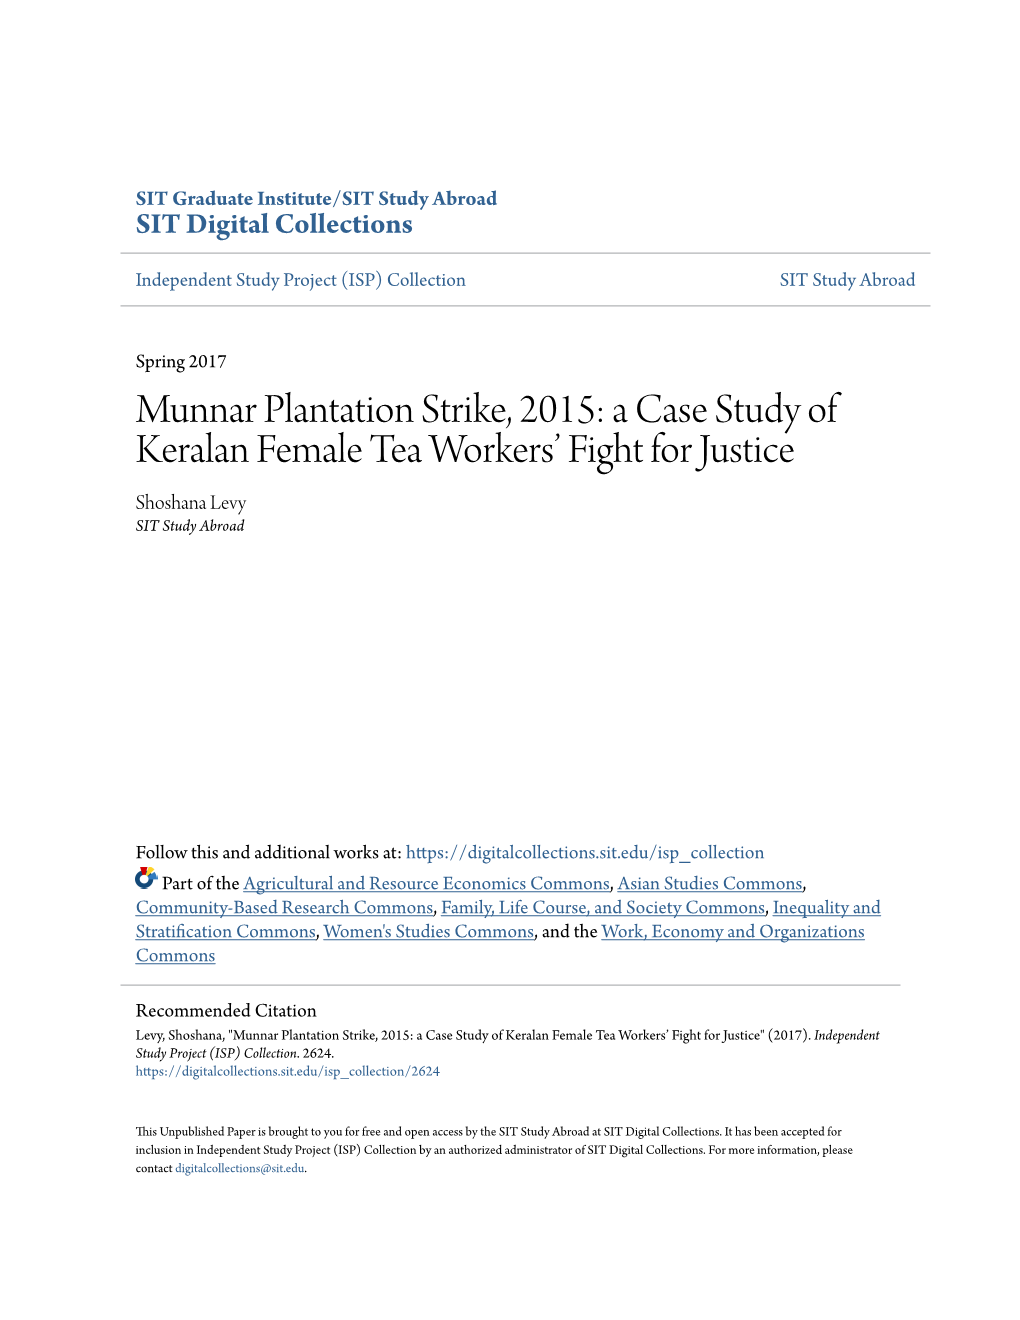 Munnar Plantation Strike, 2015: a Case Study of Keralan Female Tea Workers’ Fight for Justice Shoshana Levy SIT Study Abroad